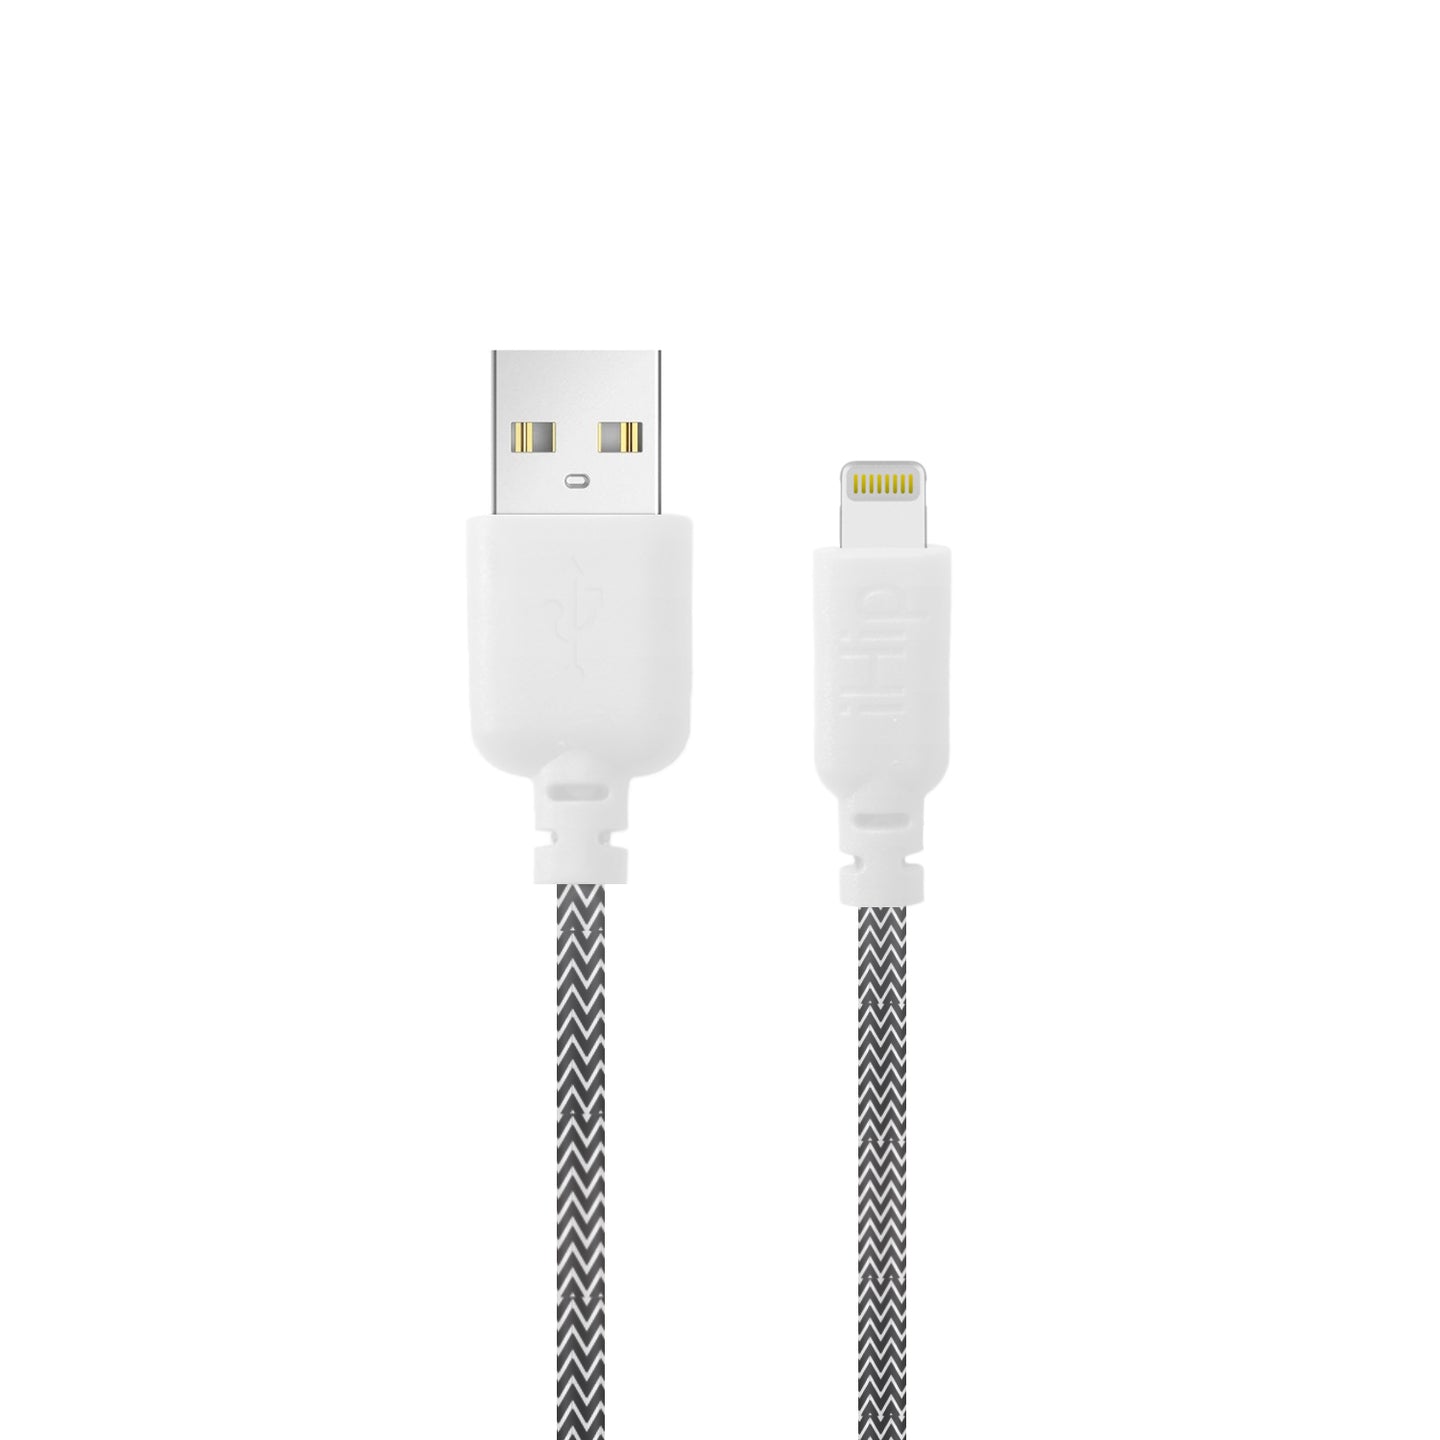 iHip Cute Cords 6ft  Black & White Braided MFI Lighting USB Sync Cable Bend Test Certified - iPhone Charger Cable for iPhone/ iPad /iPod - iHip